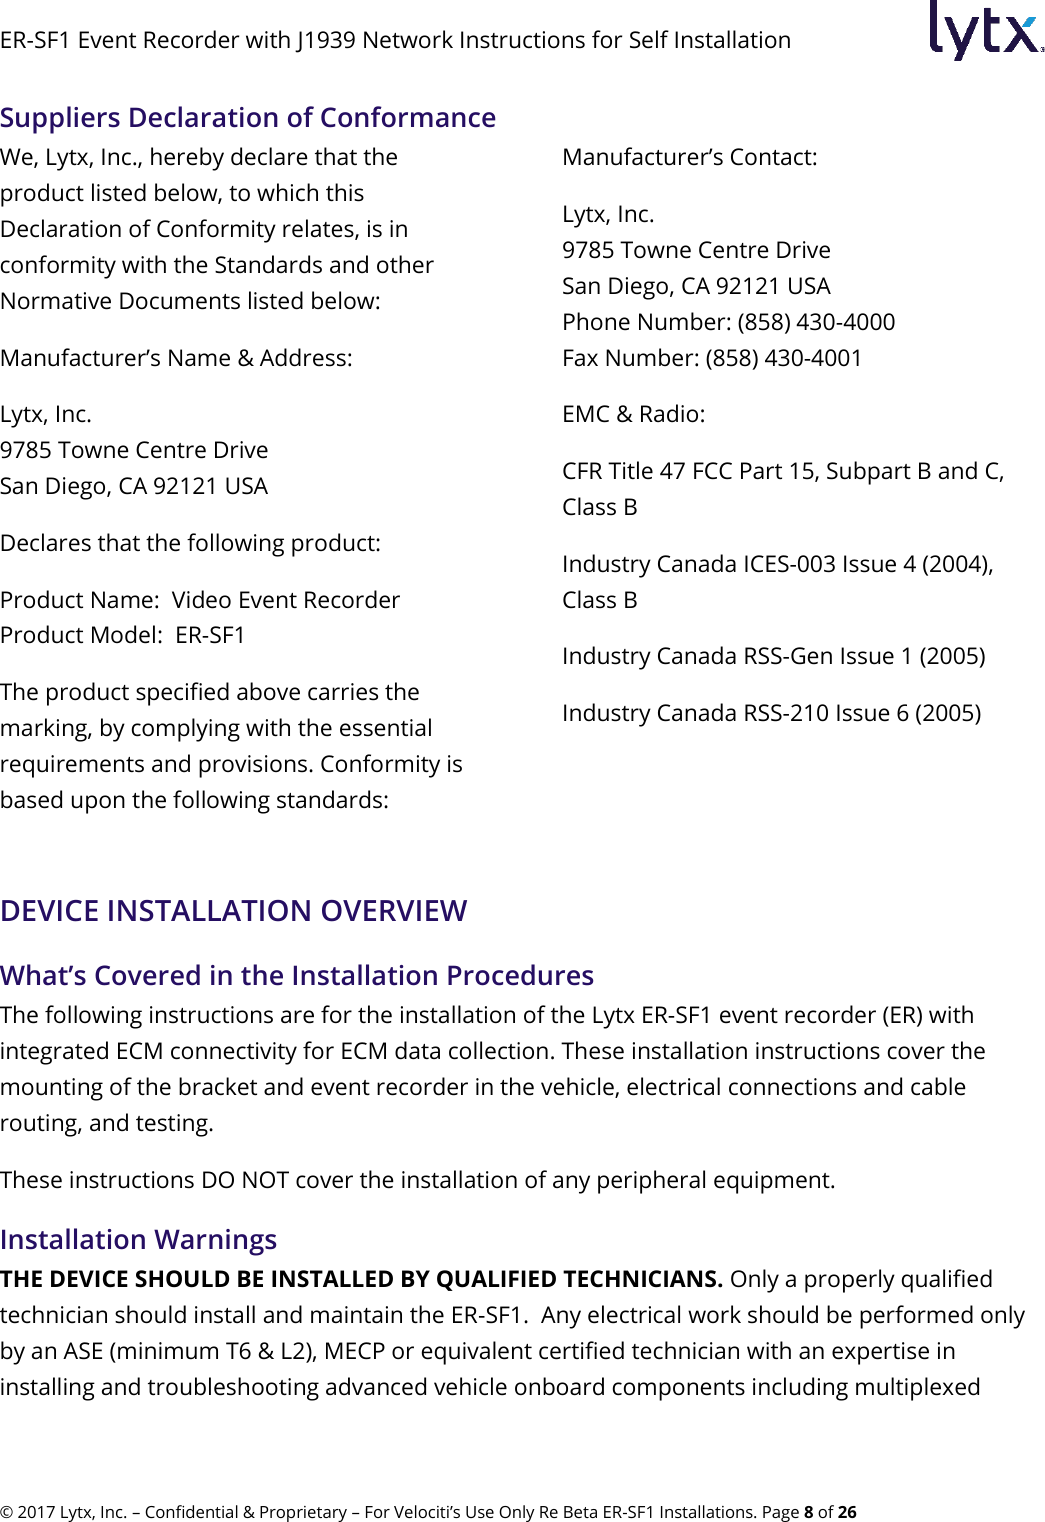 ER-SF1 Event Recorder with J1939 Network Instructions for Self Installation © 2017 Lytx, Inc. – Confidential &amp; Proprietary – For Velociti’s Use Only Re Beta ER-SF1 Installations. Page 8 of 26 Suppliers Declaration of Conformance We, Lytx, Inc., hereby declare that the product listed below, to which this Declaration of Conformity relates, is in conformity with the Standards and other Normative Documents listed below:  Manufacturer’s Name &amp; Address: Lytx, Inc. 9785 Towne Centre Drive San Diego, CA 92121 USA  Declares that the following product:  Product Name:  Video Event Recorder Product Model:  ER-SF1 The product specified above carries the marking, by complying with the essential requirements and provisions. Conformity is based upon the following standards: Manufacturer’s Contact: Lytx, Inc. 9785 Towne Centre Drive San Diego, CA 92121 USA Phone Number: (858) 430-4000   Fax Number: (858) 430-4001 EMC &amp; Radio: CFR Title 47 FCC Part 15, Subpart B and C, Class B Industry Canada ICES-003 Issue 4 (2004), Class B Industry Canada RSS-Gen Issue 1 (2005) Industry Canada RSS-210 Issue 6 (2005) DEVICE INSTALLATION OVERVIEW What’s Covered in the Installation Procedures The following instructions are for the installation of the Lytx ER-SF1 event recorder (ER) with integrated ECM connectivity for ECM data collection. These installation instructions cover the mounting of the bracket and event recorder in the vehicle, electrical connections and cable routing, and testing. These instructions DO NOT cover the installation of any peripheral equipment. Installation Warnings THE DEVICE SHOULD BE INSTALLED BY QUALIFIED TECHNICIANS. Only a properly qualified technician should install and maintain the ER-SF1.  Any electrical work should be performed only by an ASE (minimum T6 &amp; L2), MECP or equivalent certified technician with an expertise in installing and troubleshooting advanced vehicle onboard components including multiplexed 